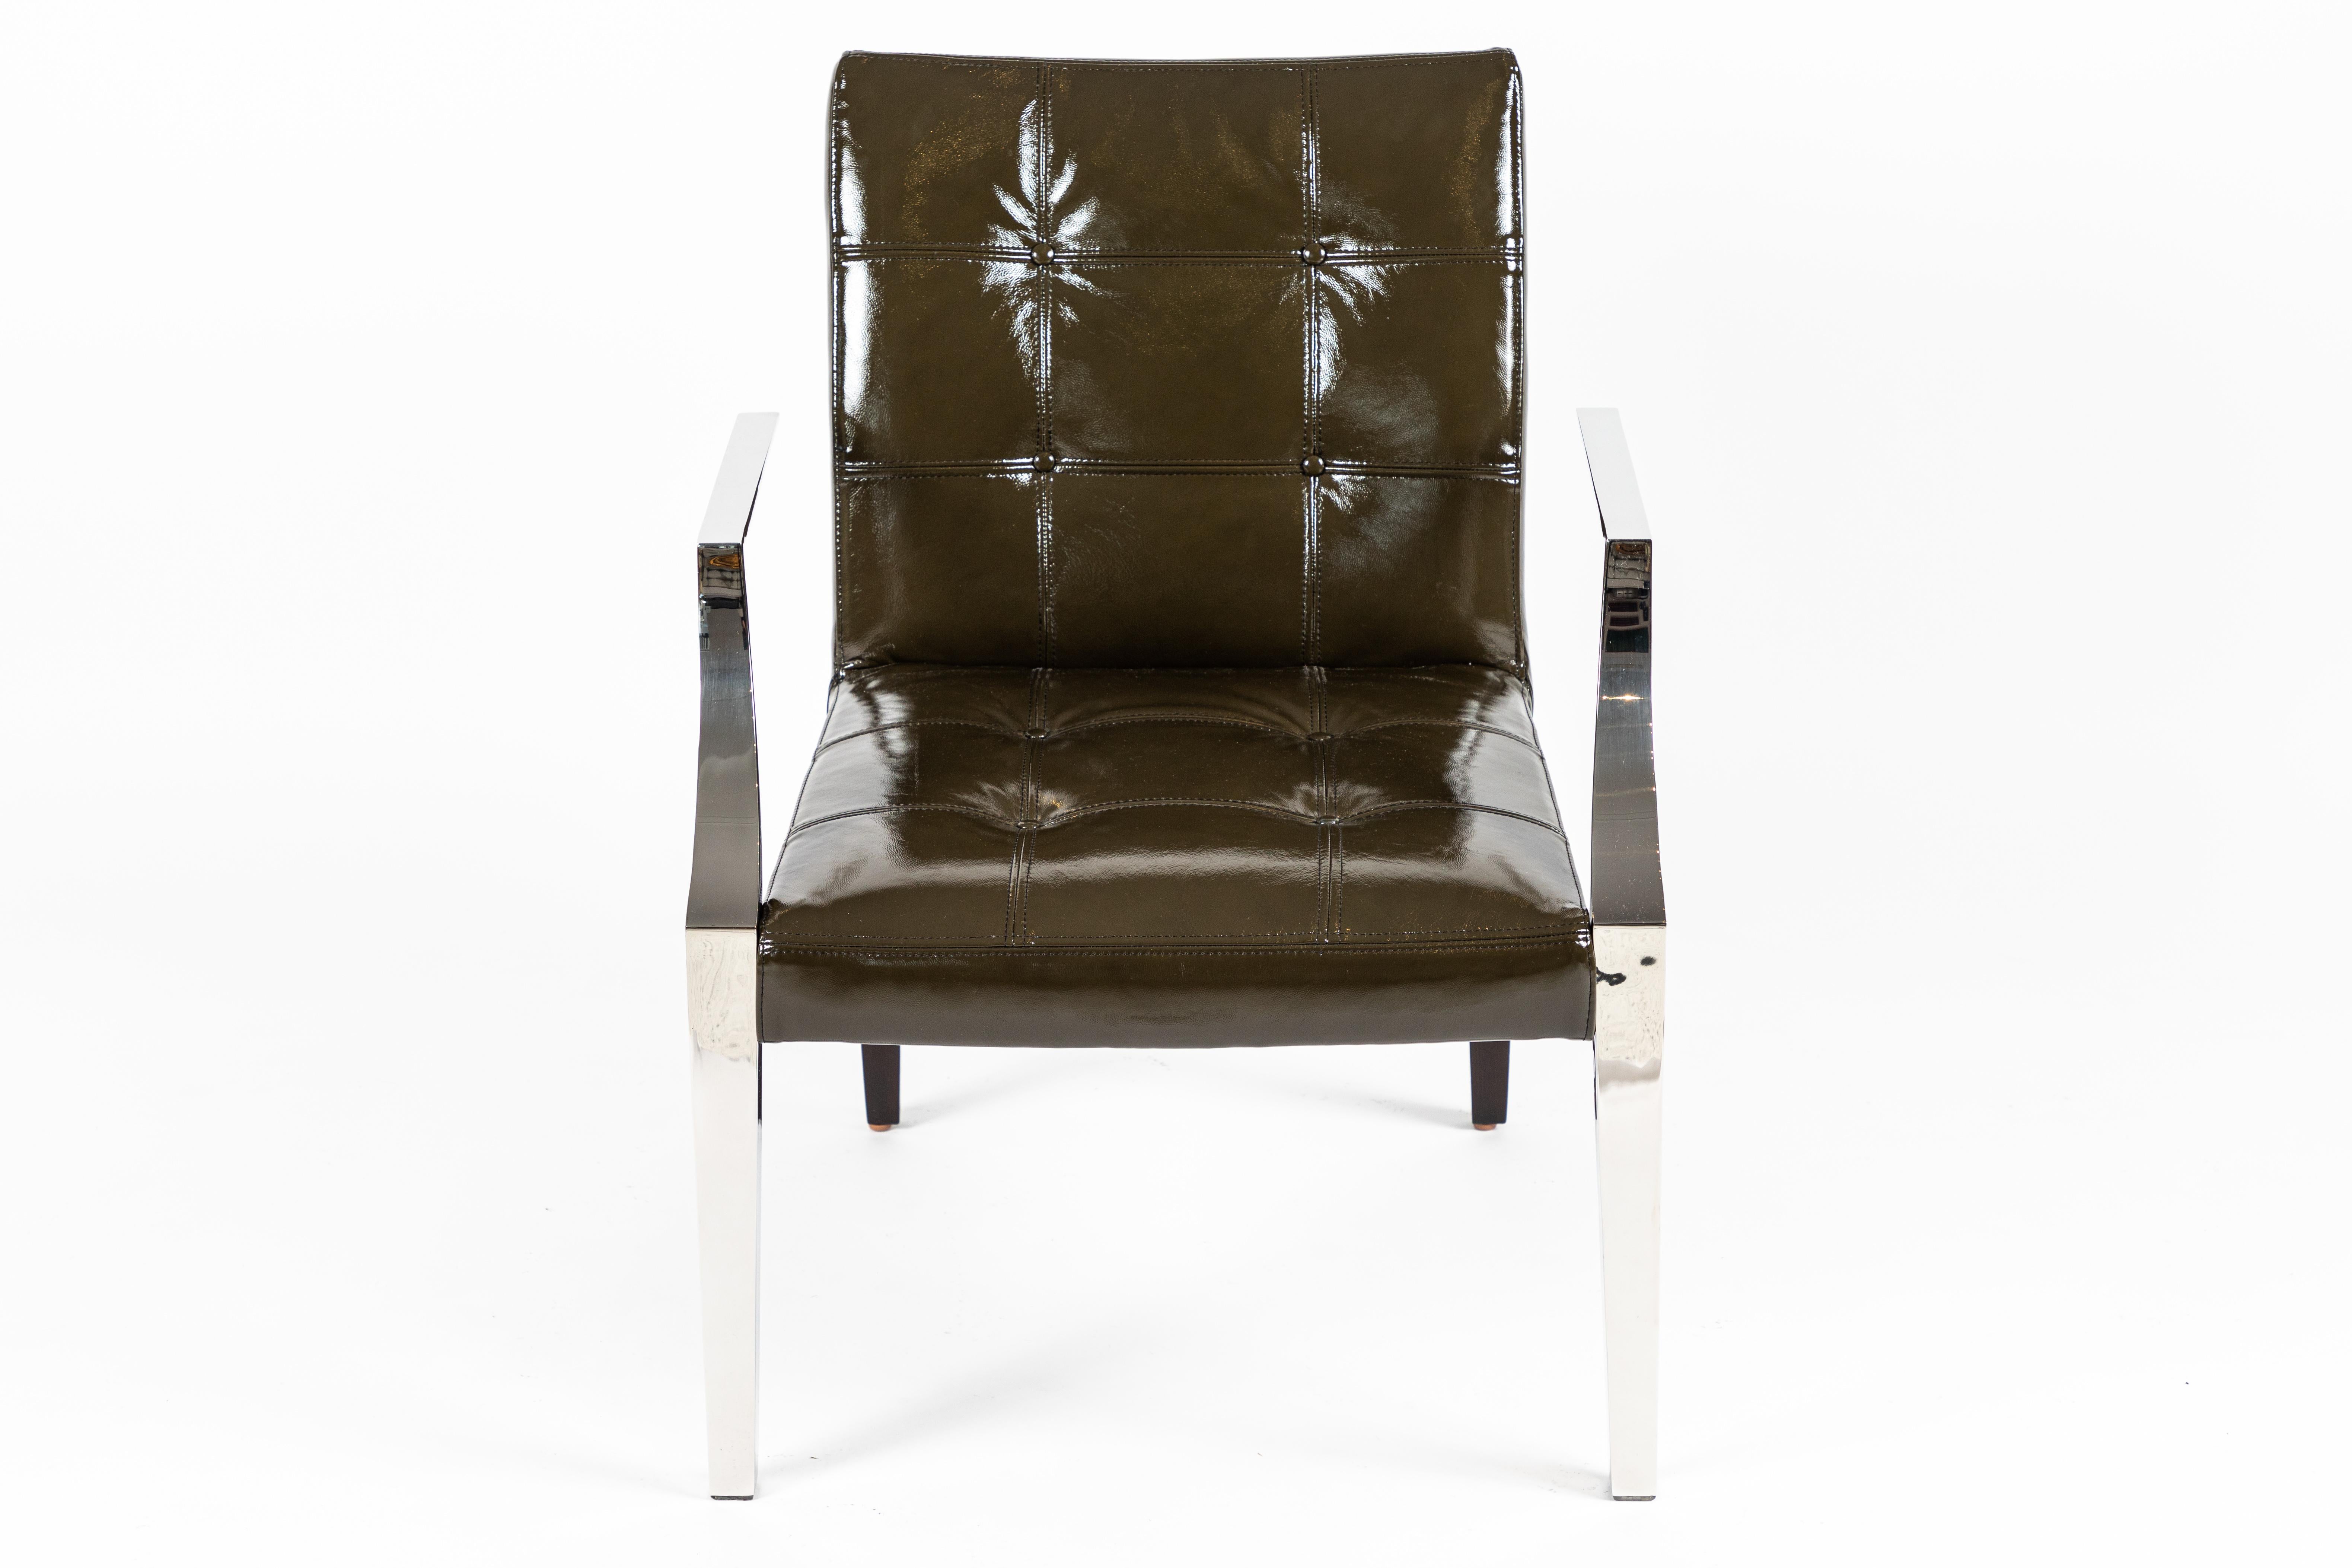 Polished Monseigneur Chairs Designed by Philippe Starck for Driade For Sale